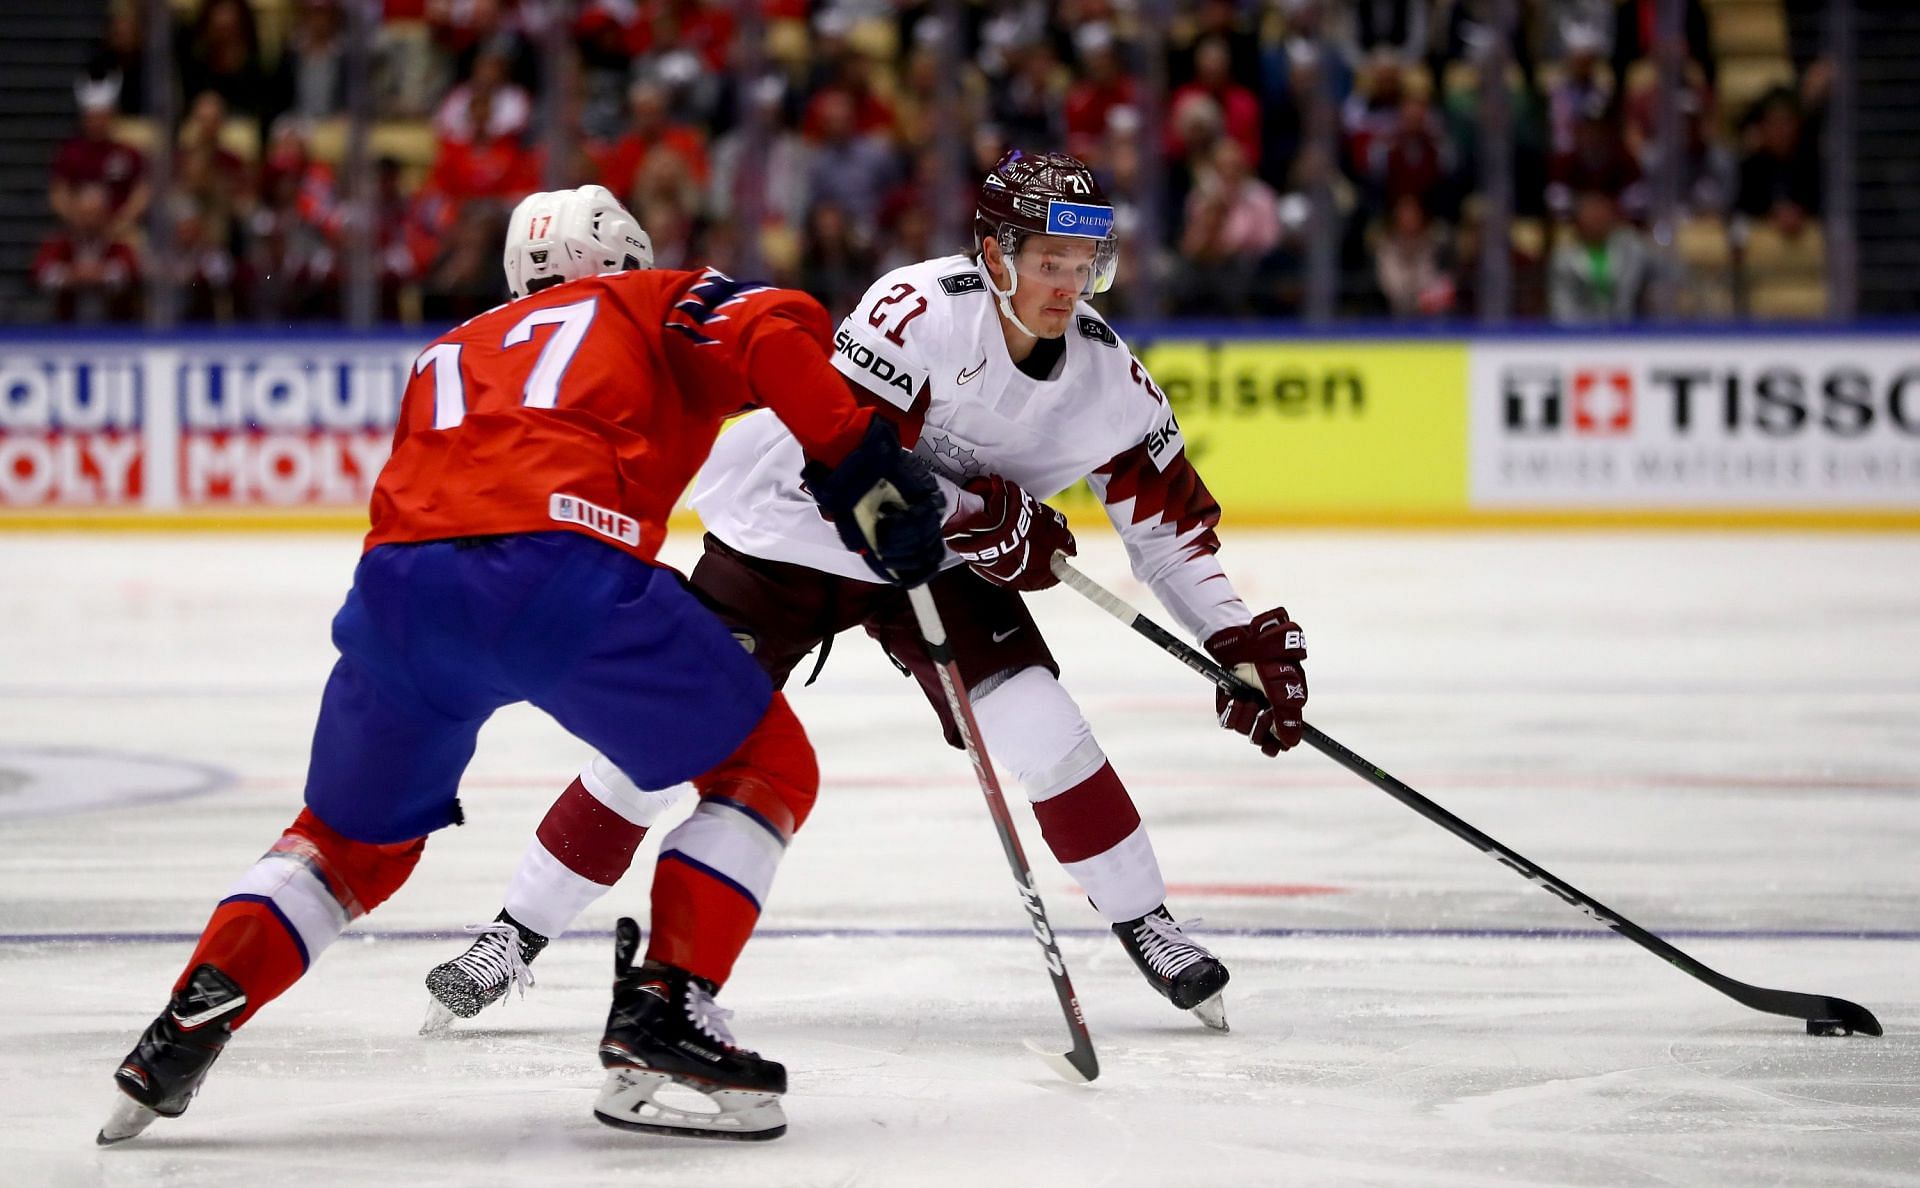 Latvia vs Norway Group B How to watch, live streaming, channel list, and more